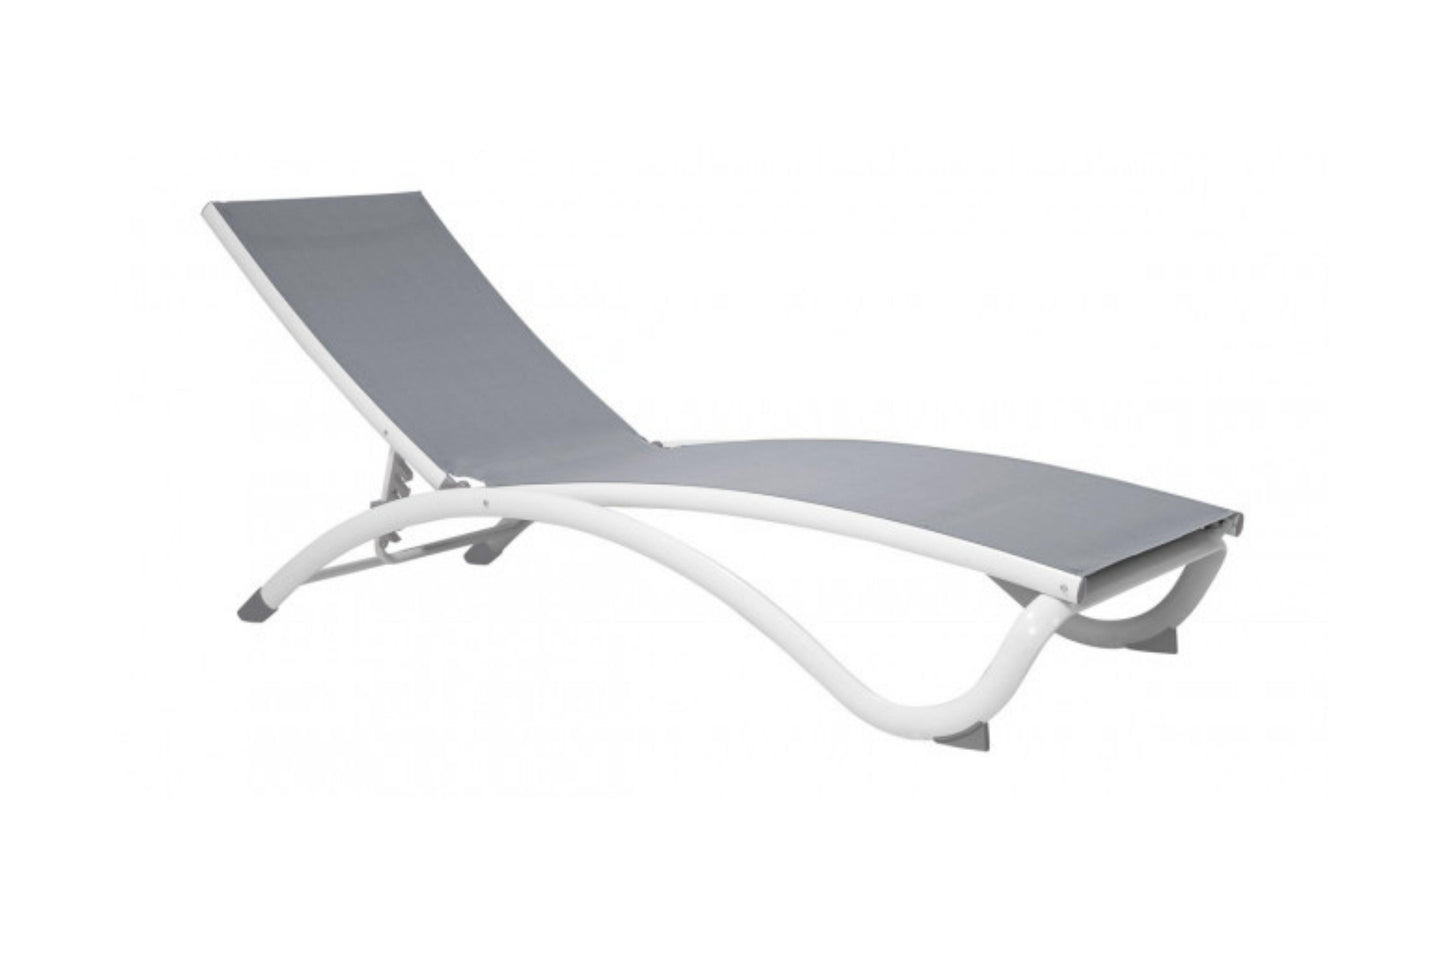 Arch Stackable Sling Chaise Lounger SKU: PRP-4001 - Venini Furniture 